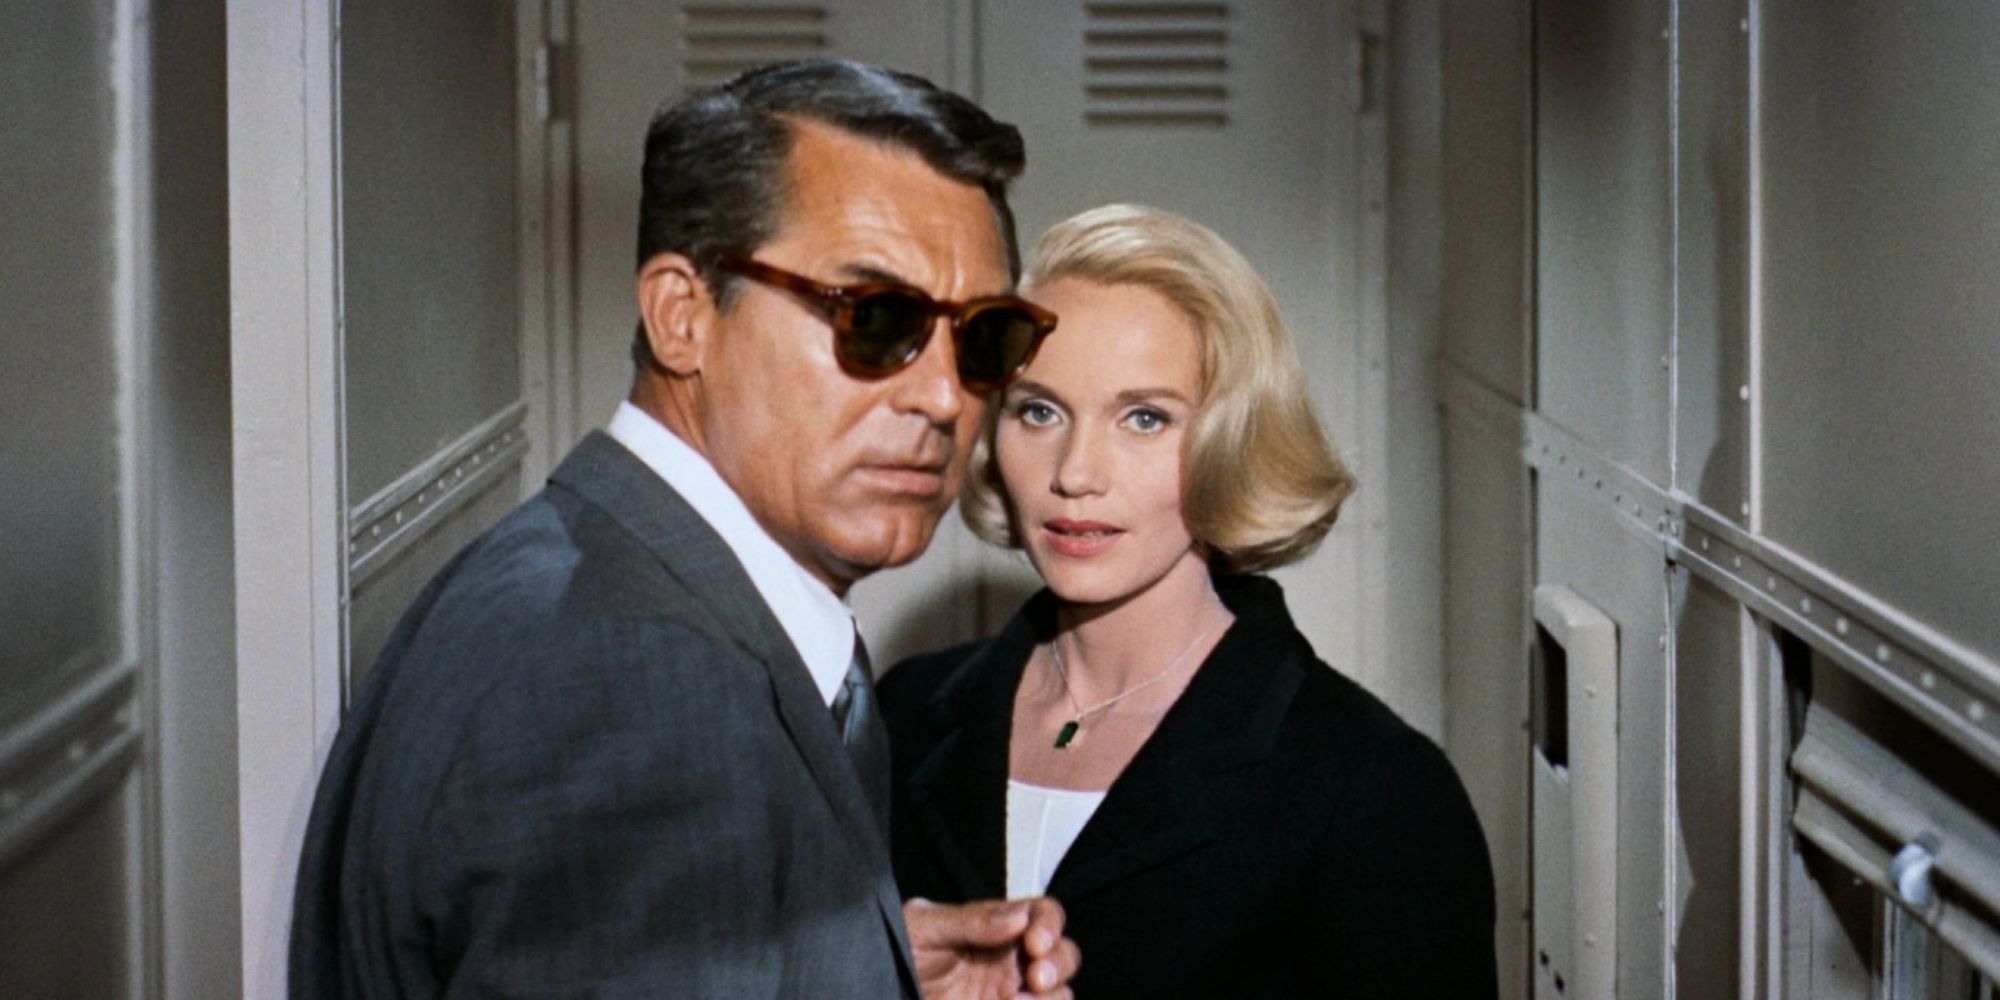 Cary Grant and Eve Marie Saint as Roger and Eve staring towards the camera